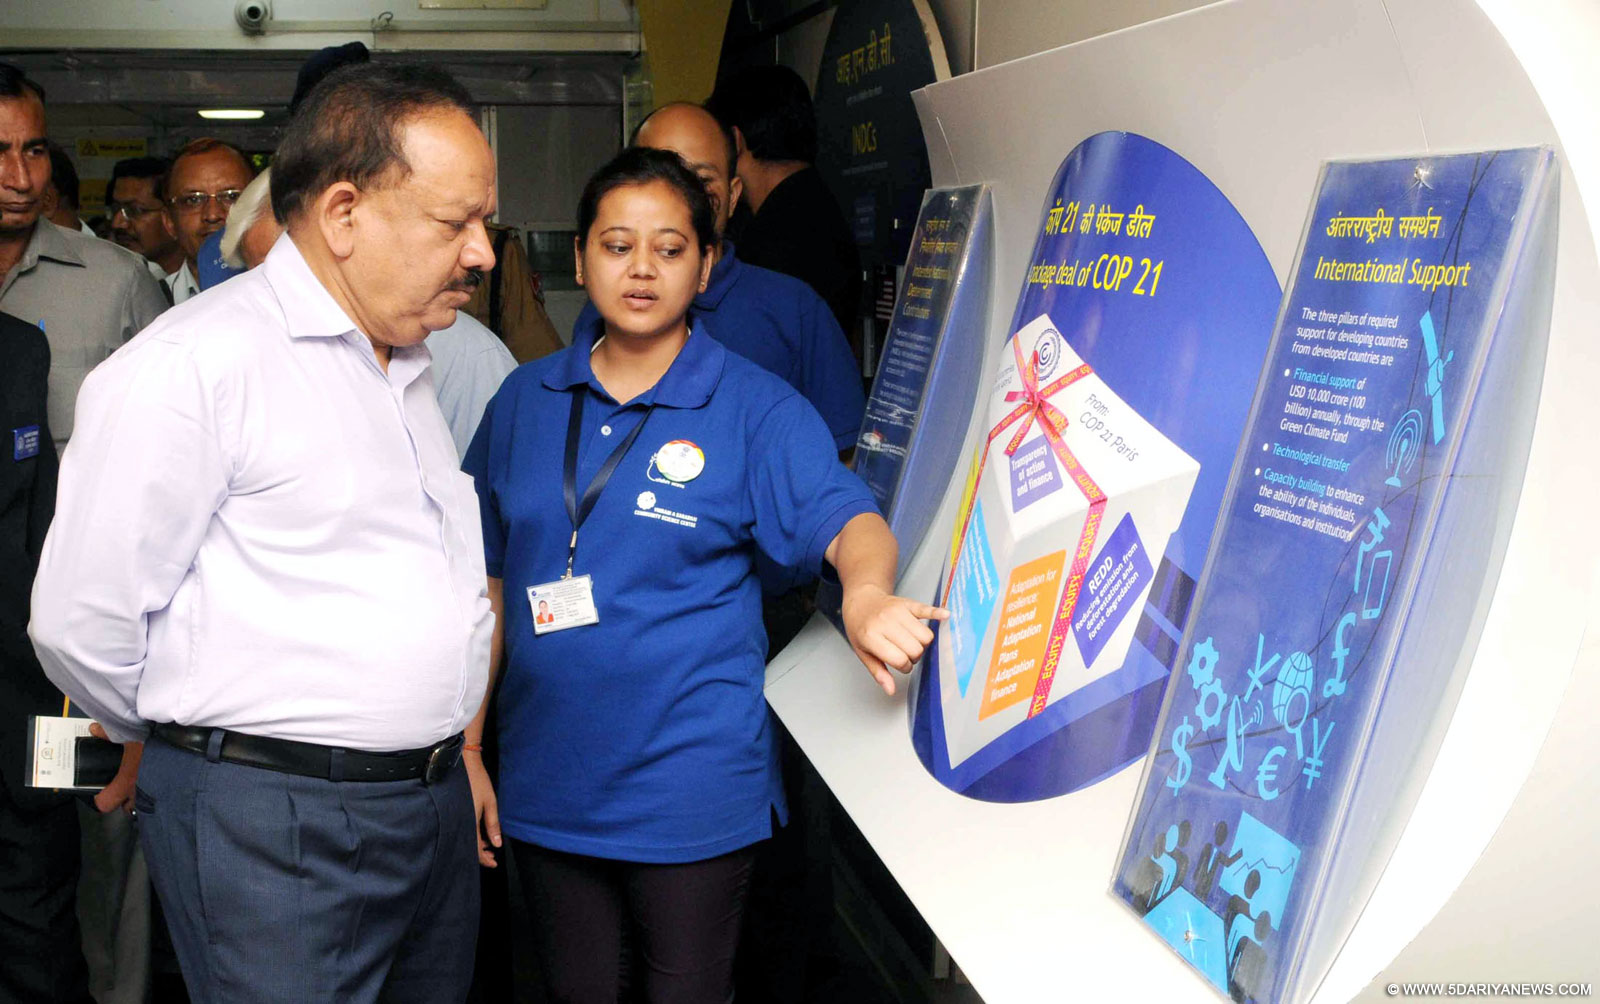 The Union Minister for Science & Technology and Earth Sciences, Dr. Harsh Vardhan visiting the exhibition "Science Express", at Safdarjung Railway Station, in New Delhi on October 17, 2015. 